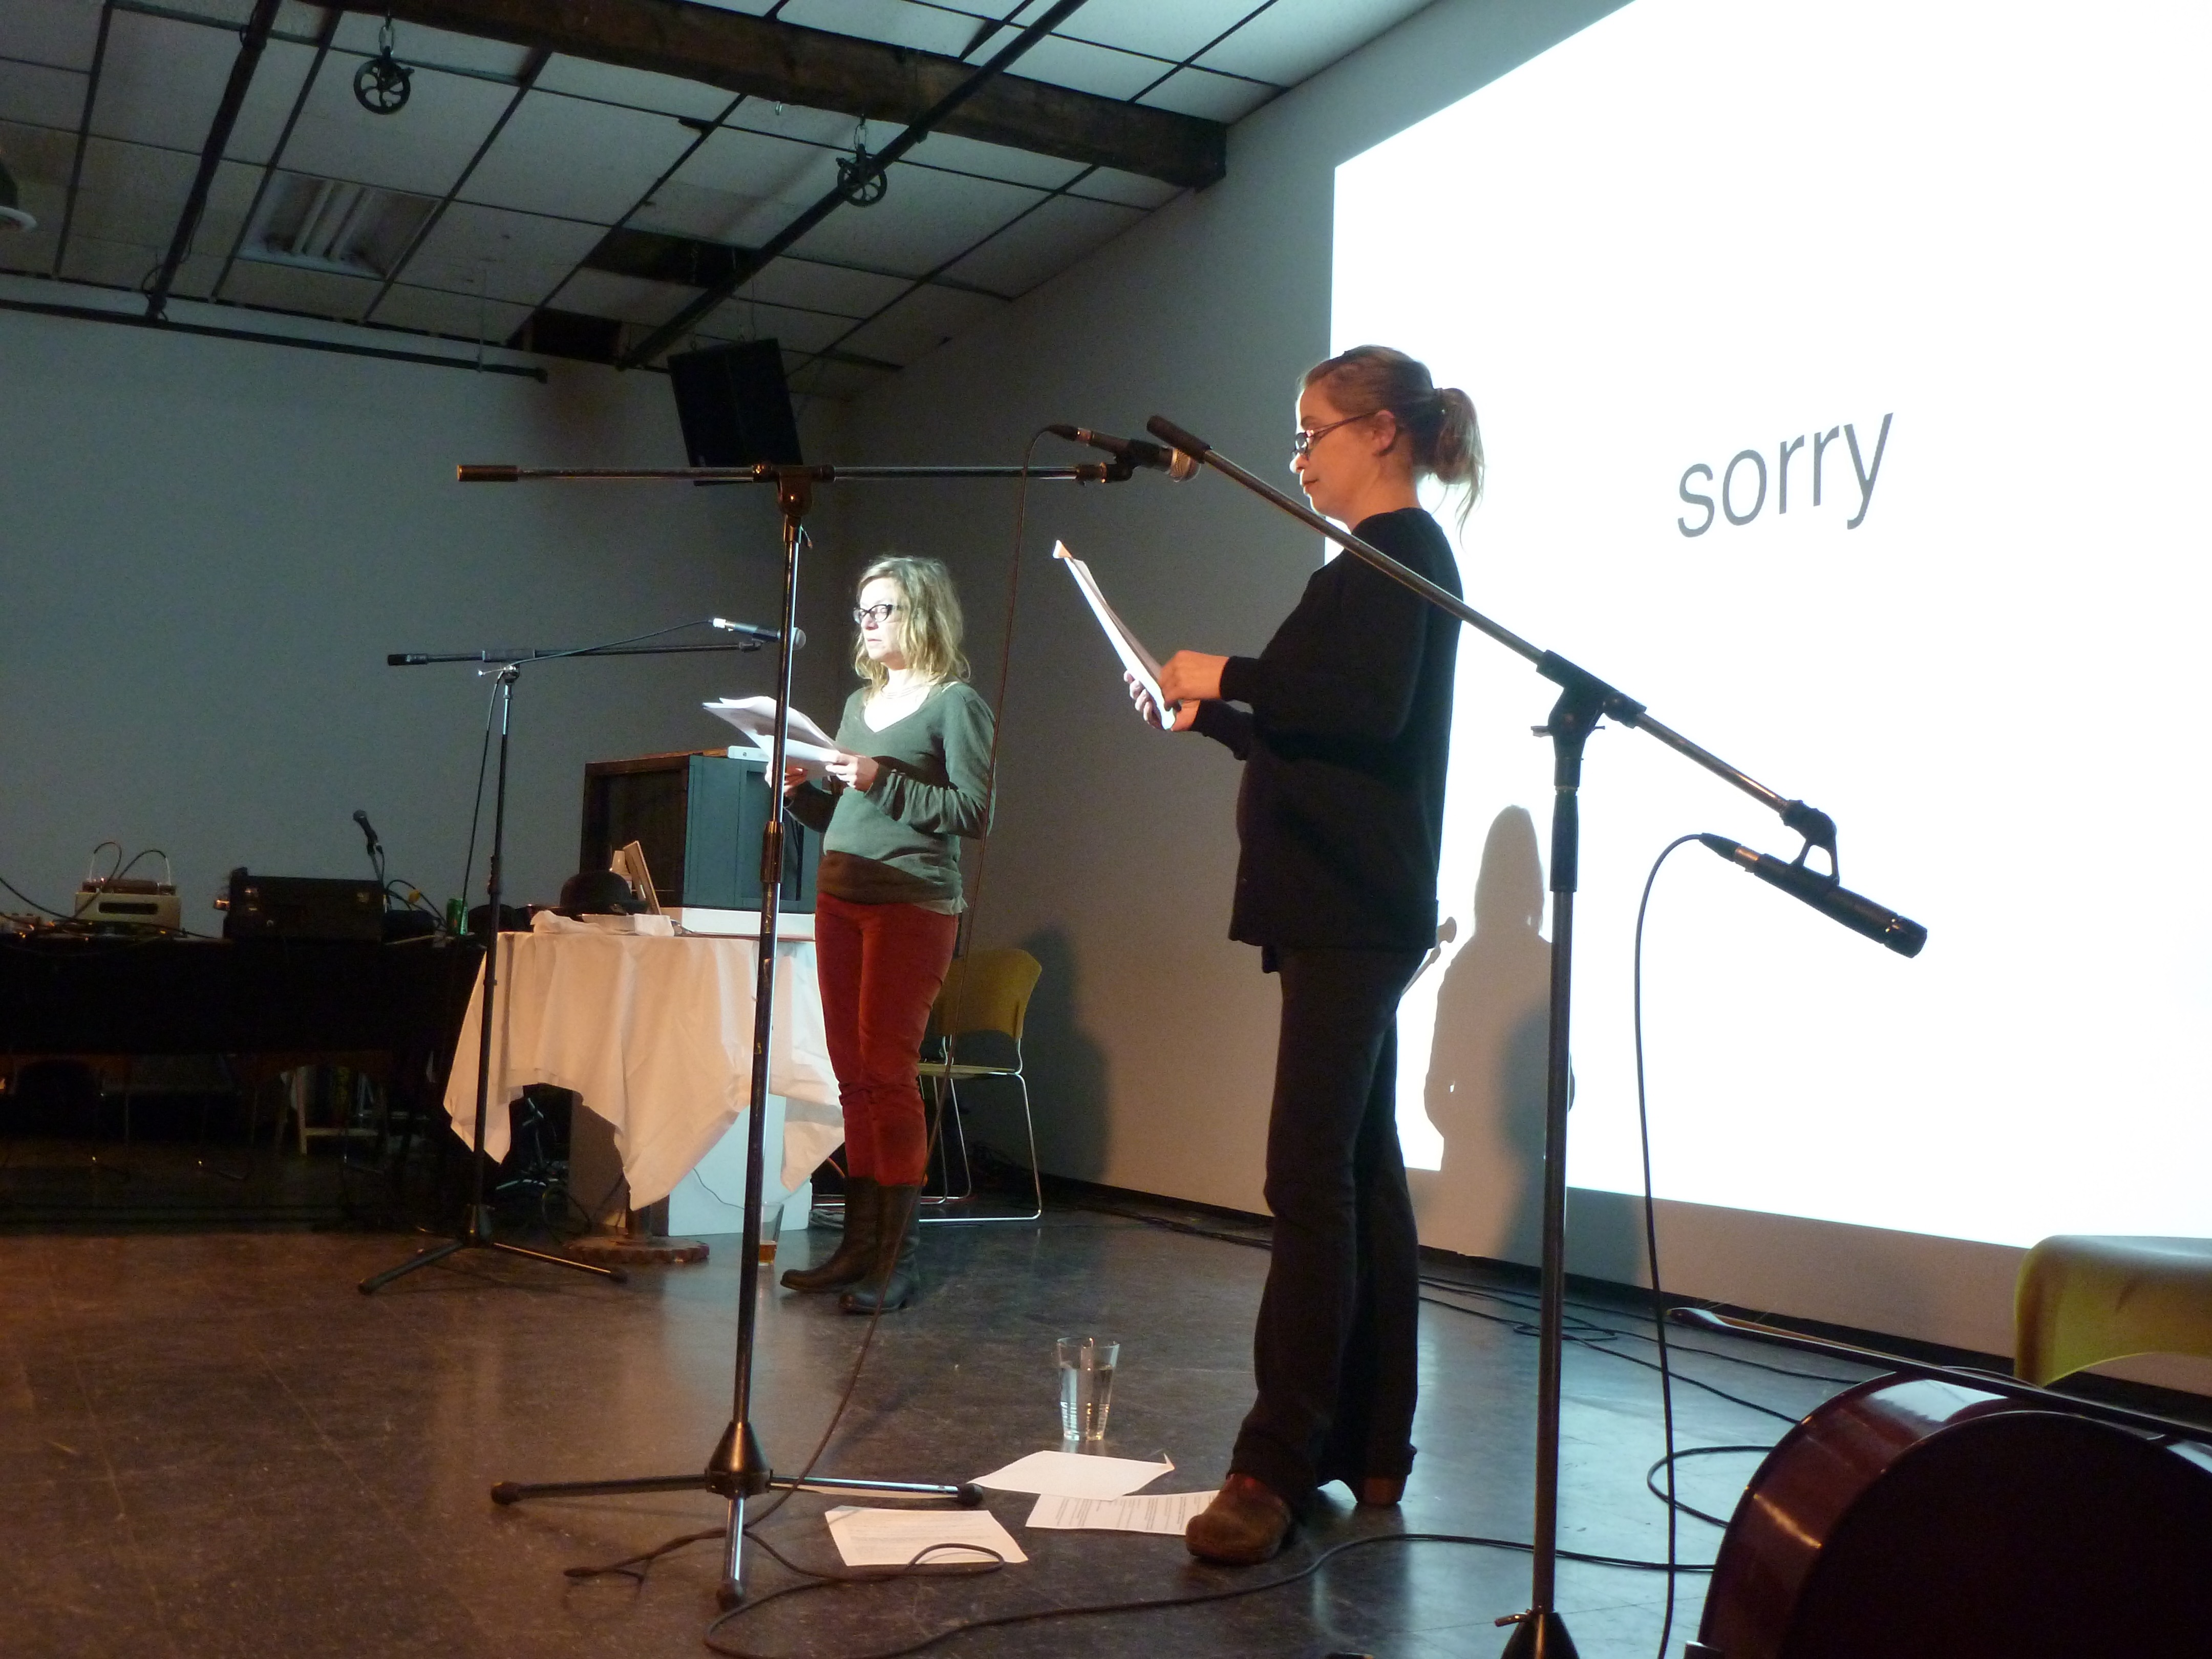 Anakana Schofield and leannej reading at Not Sent Letters in front of a screen projectimg text